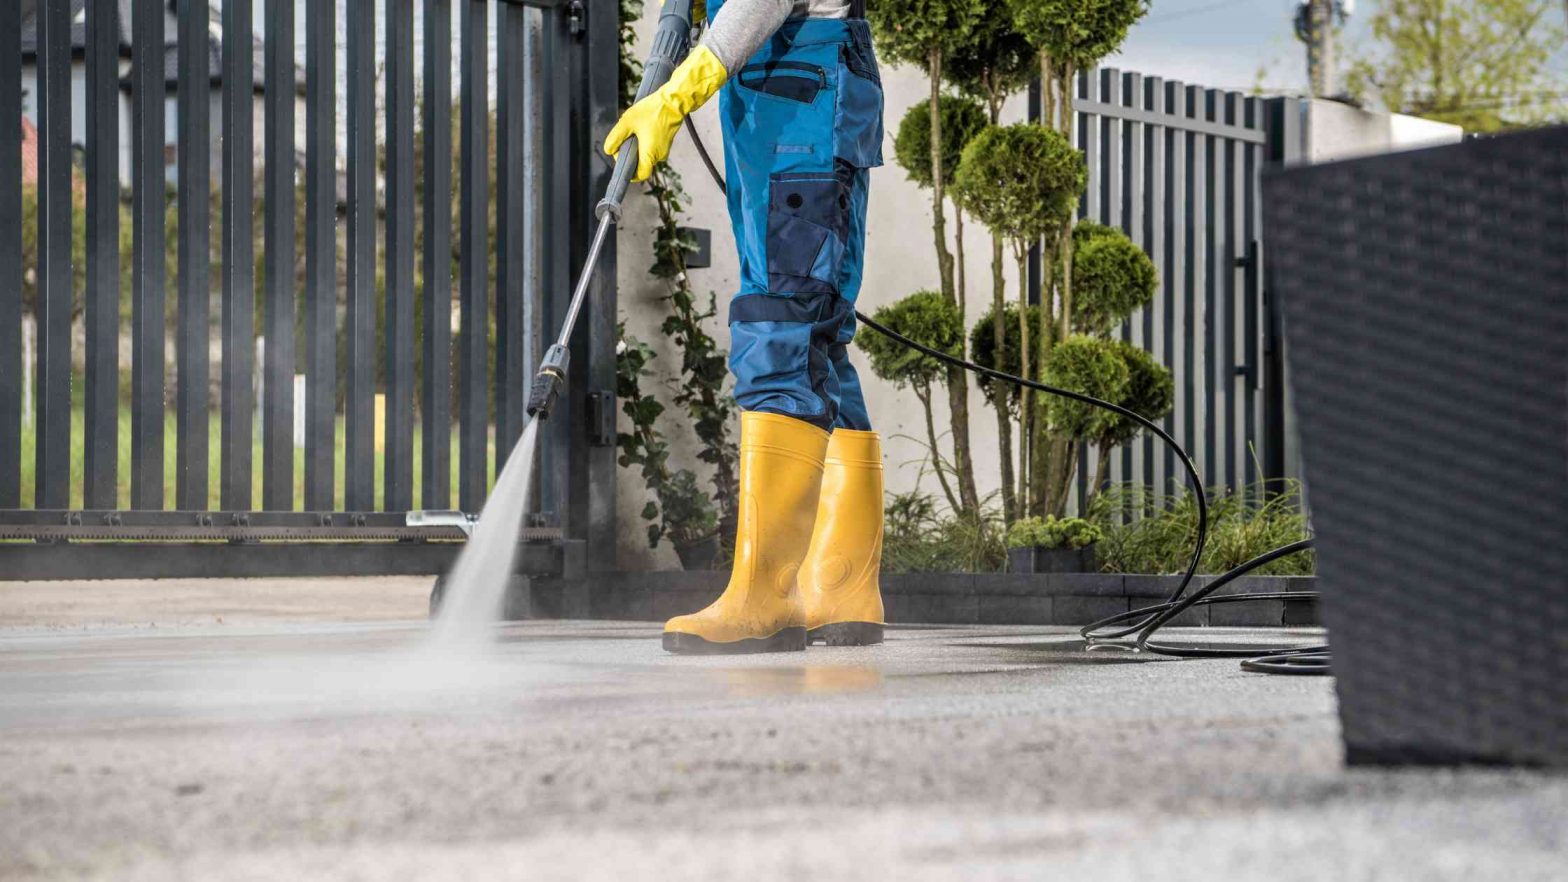 Is Power Washing Bad for Concrete